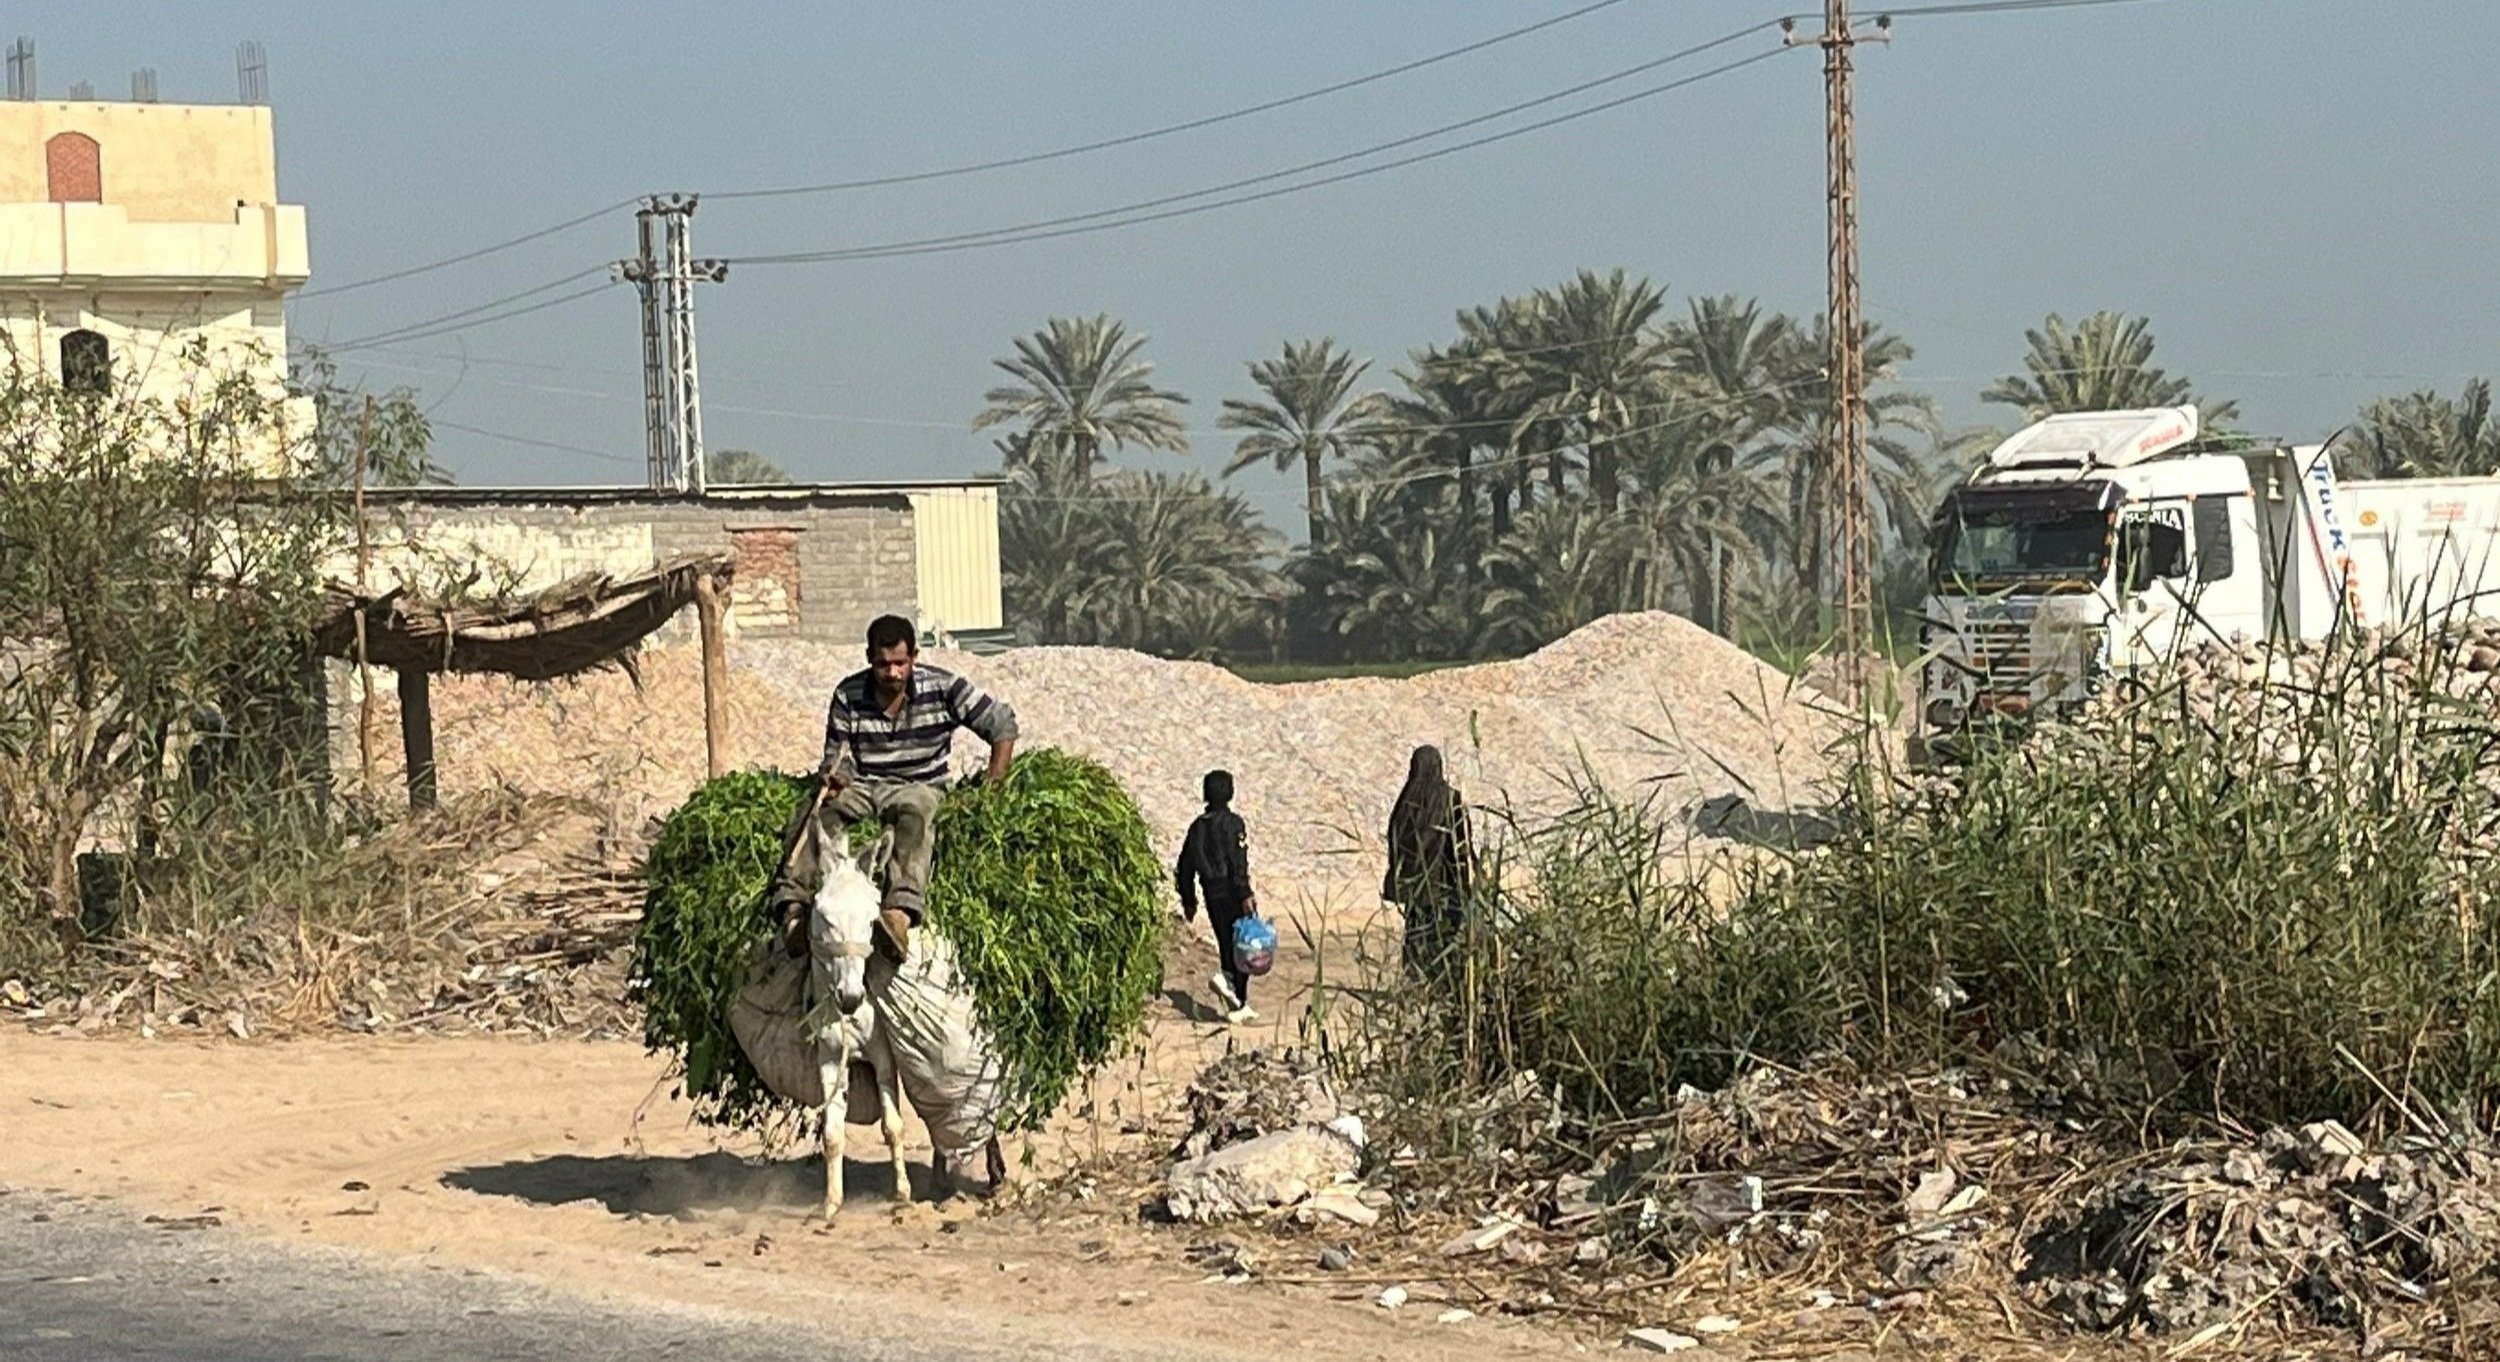  Fayoum is the very productive breadbasket of the desert country of Egypt, bringing life and sustenance, much as the churches we visited bring life in the hard, dry areas they serve. In both areas of life, hard work is required, and the Lord brings t